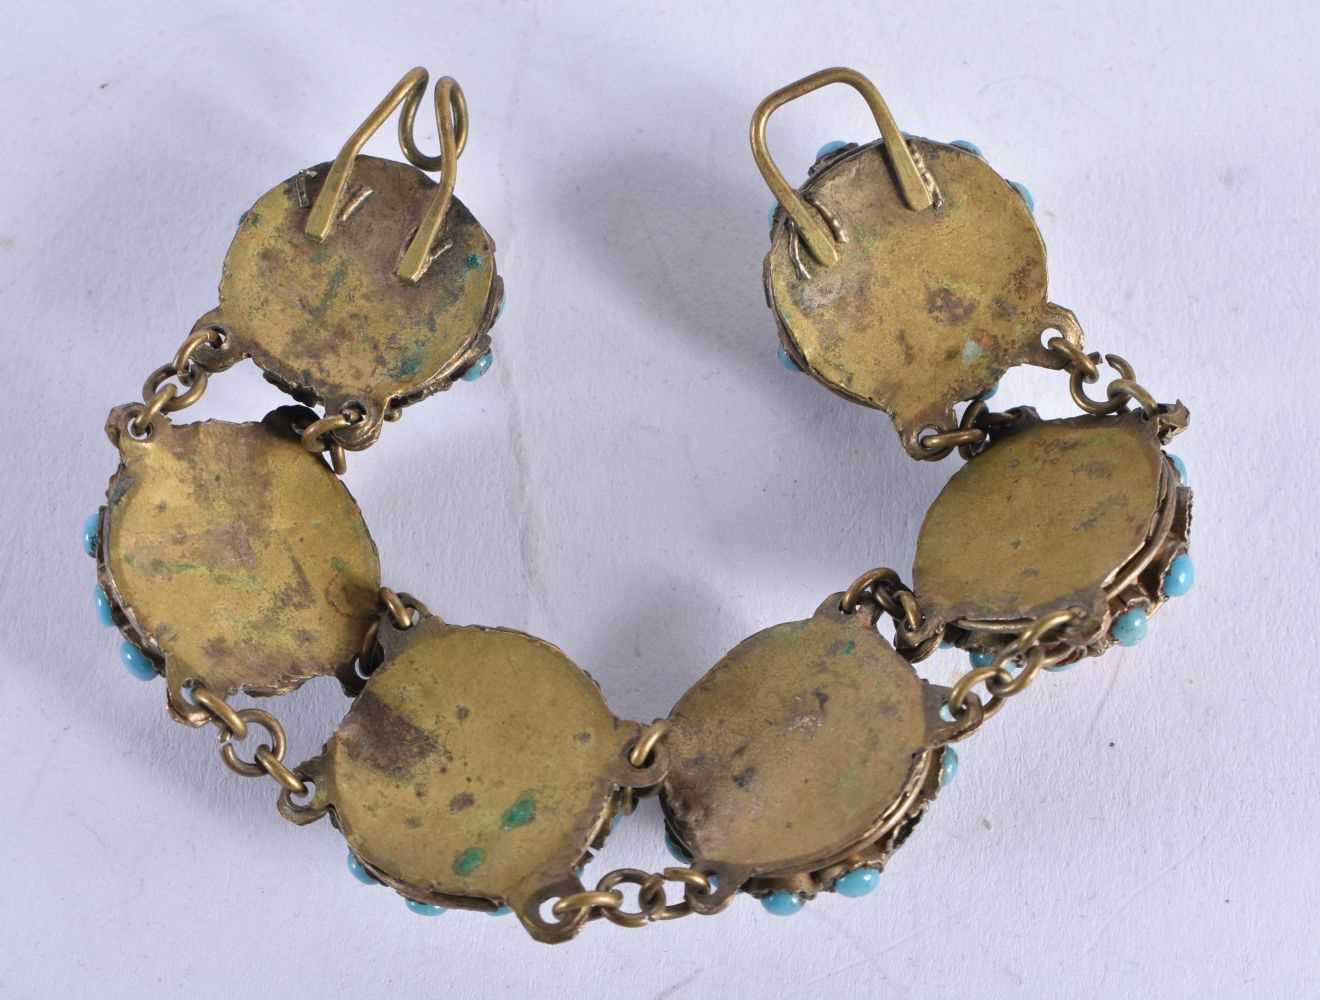 An Egyptian Bracelet set with Turquoise and Coral.16.5 cm long, weight 28.1g - Image 2 of 3